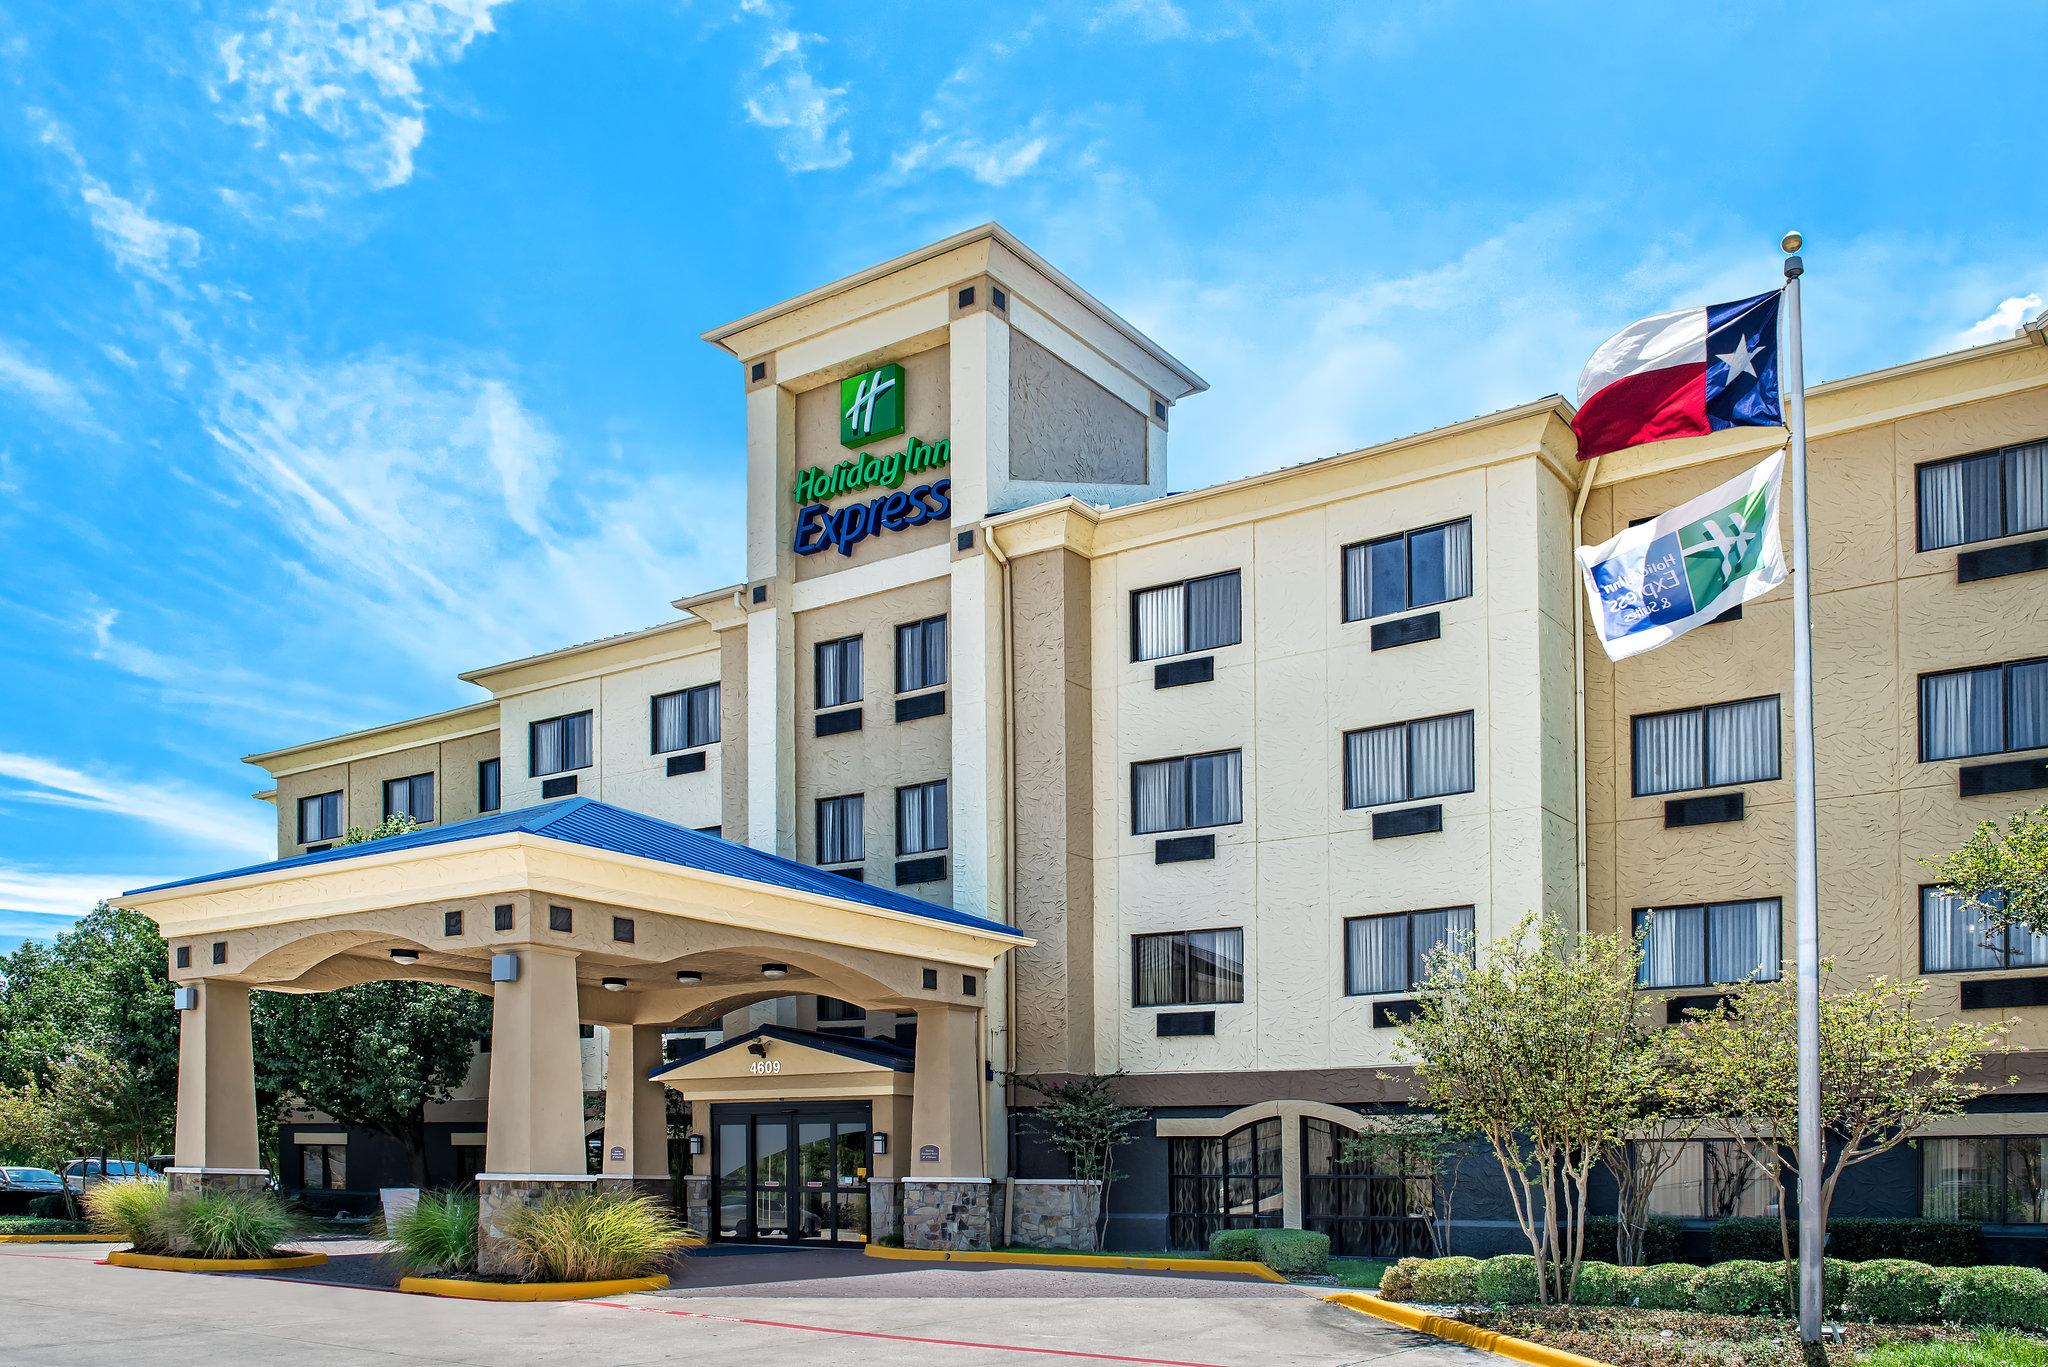 Holiday Inn Express Hotel & Suites Fort Worth Southwest(I-20) in Fort Worth, TX